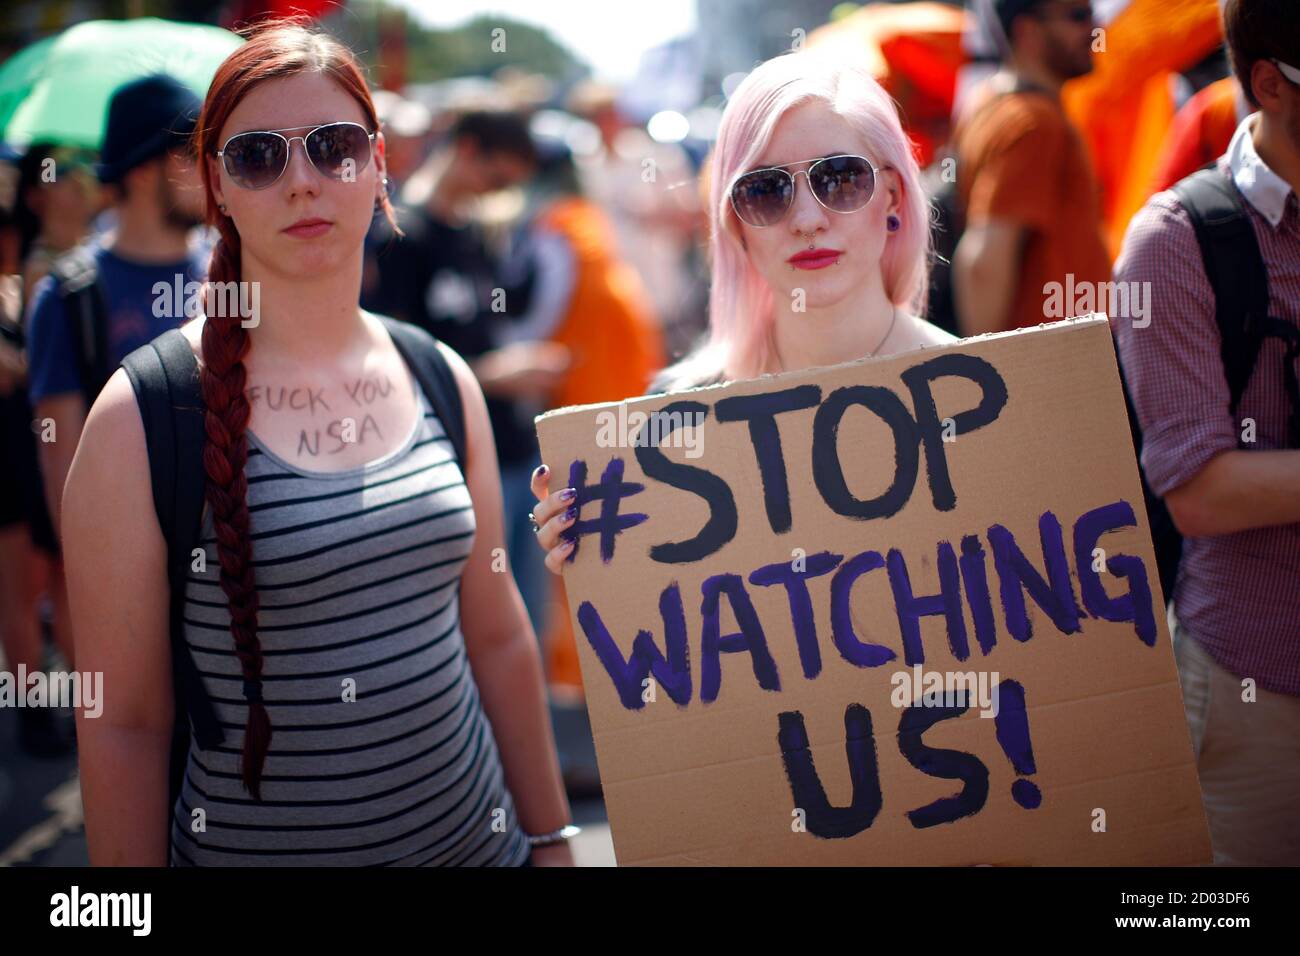 Two protesters attend a demonstration against secret monitoring programmes PRISM, TEMPORA, INDECT and showing solidarity with whistleblowers Edward Snowden, Bradley Manning and others in Berlin July 27, 2013. REUTERS/Pawel Kopczynski (GERMANY  - Tags: CIVIL UNREST) Stock Photo